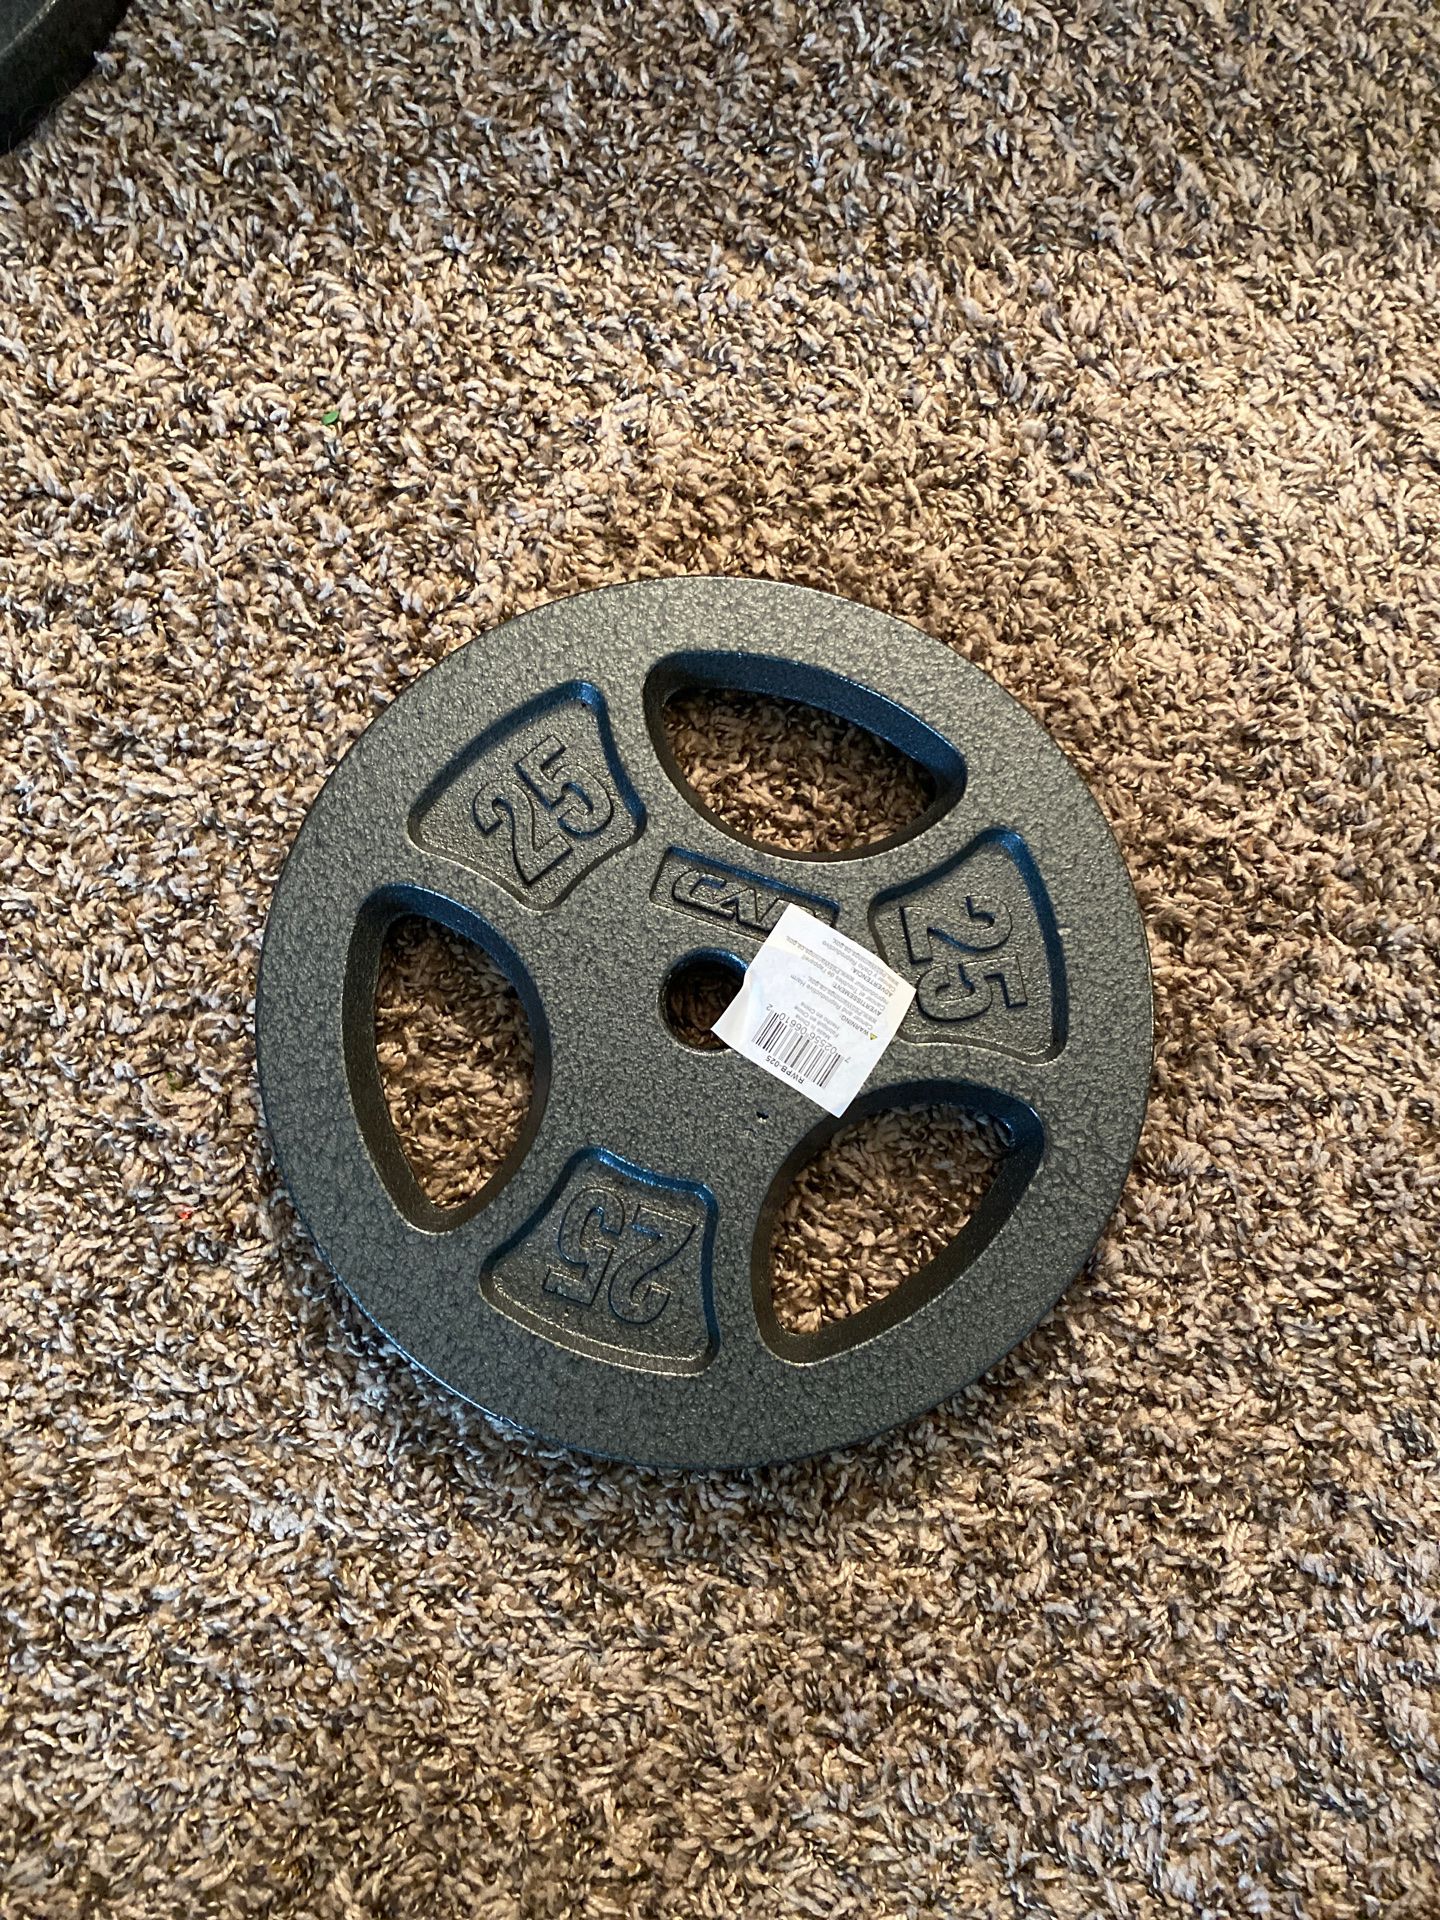 25 lb plate weights